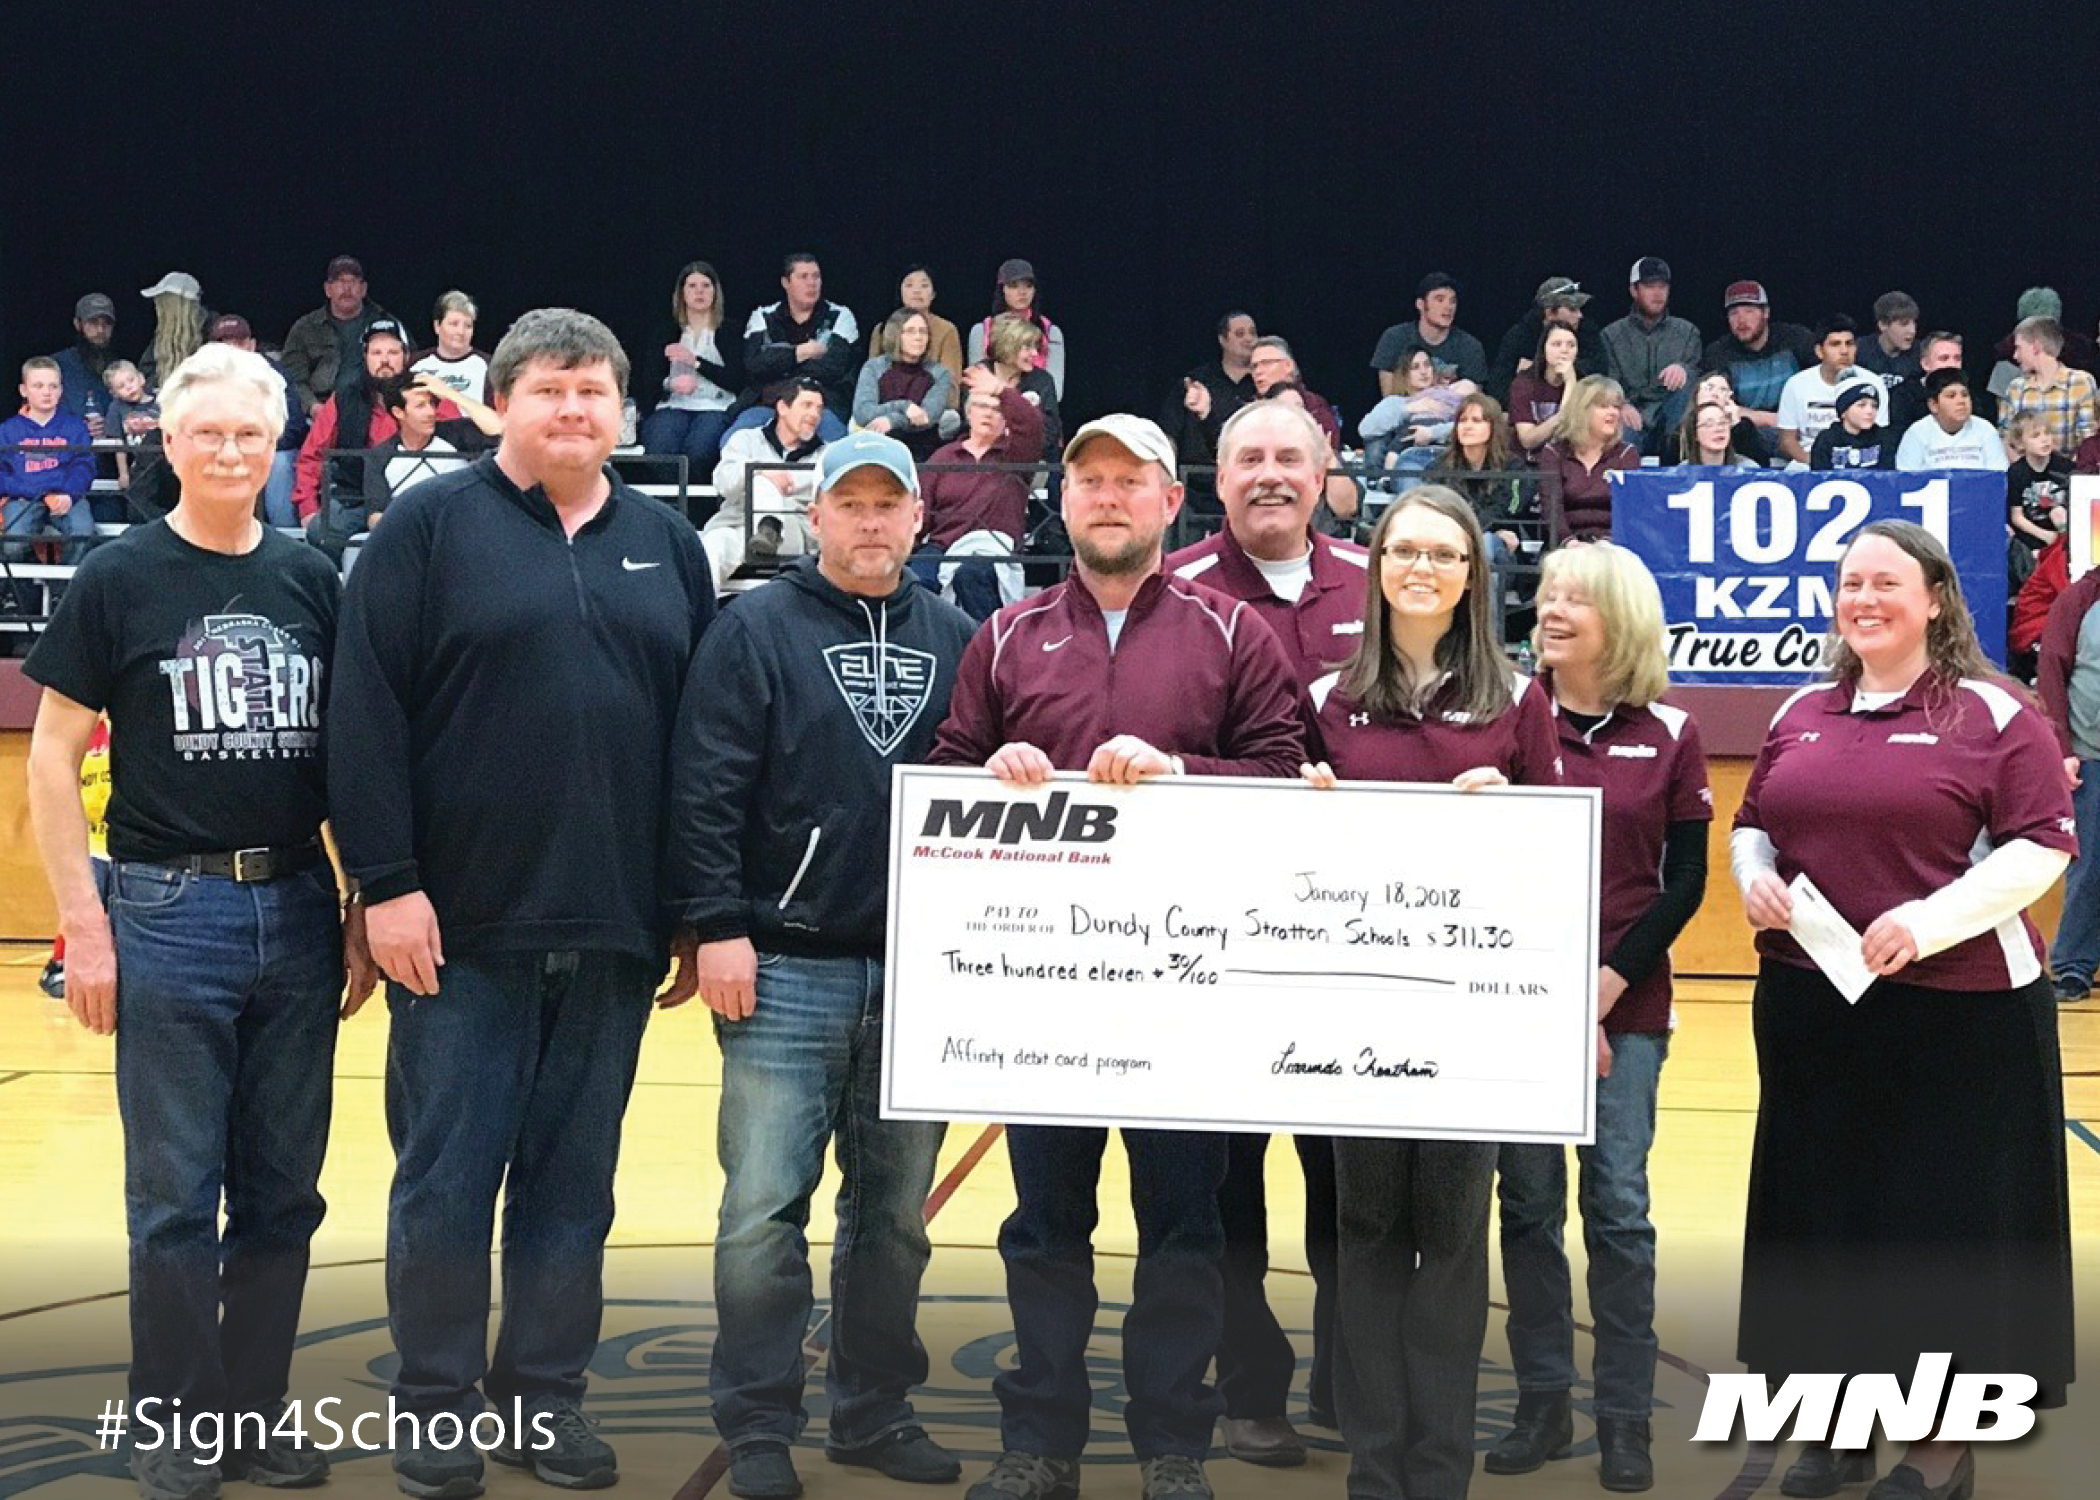 Dundy County - Stratton Public Schools Receives Donation from Tiger Debit Card Program